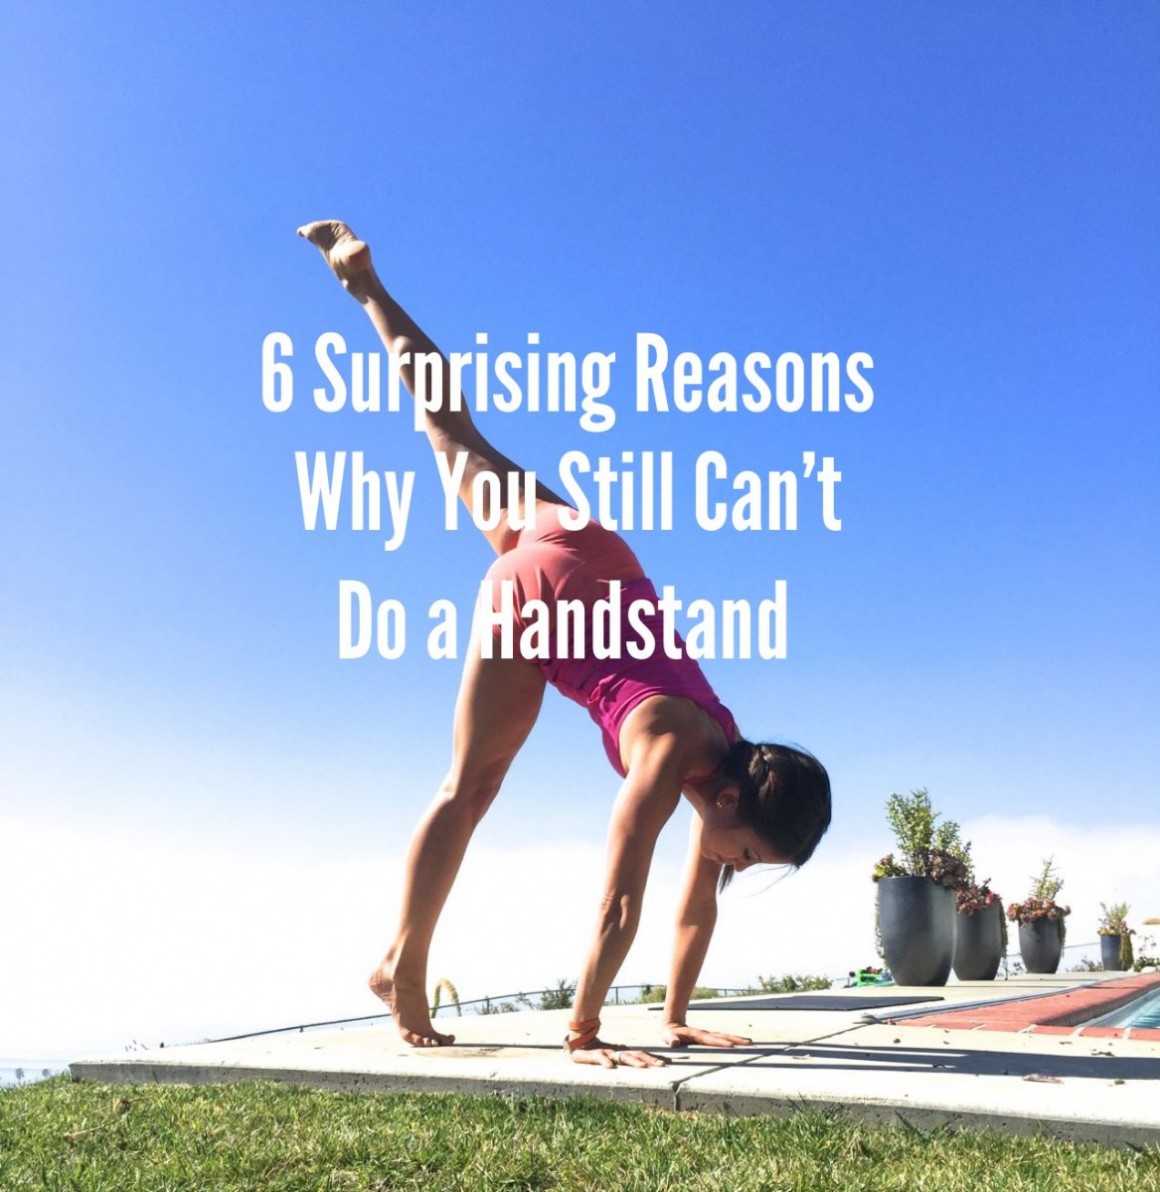 6 Surprising Reasons Why You Still Can’t Do a Handstand